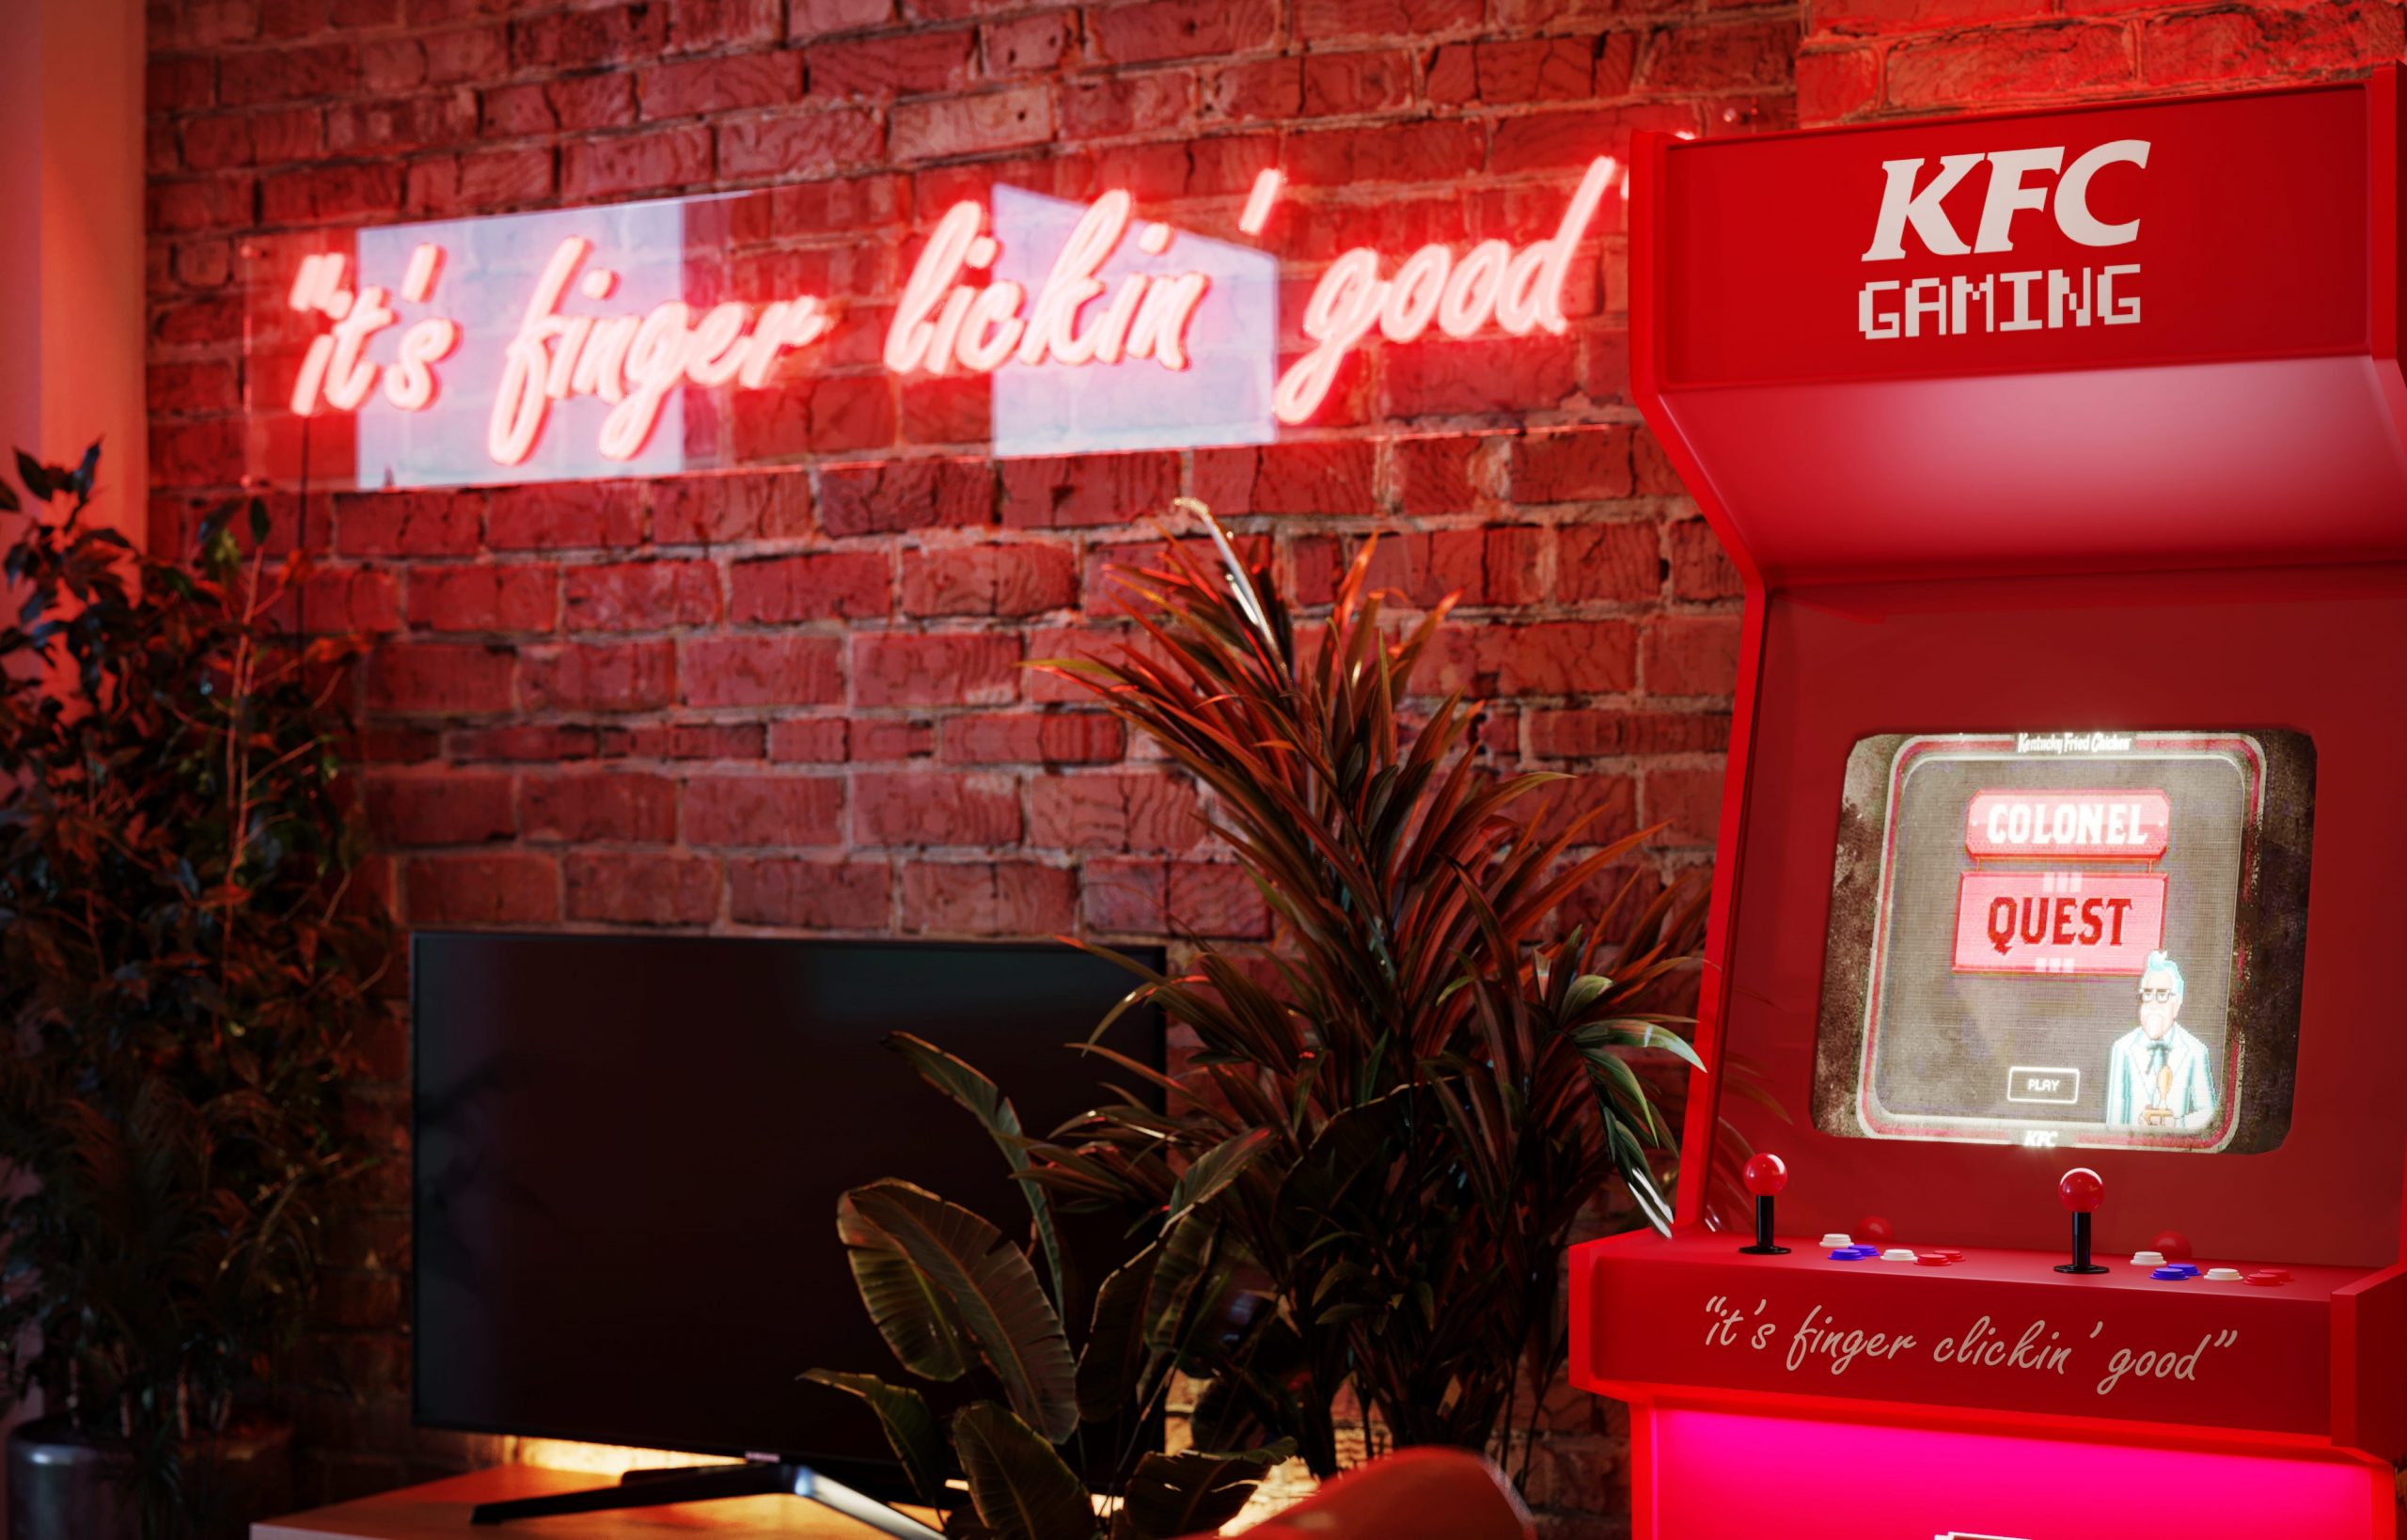 A red KFC-themed arcade machine stands next to a brick wall with an "It's finger lickin' good" sign written in neon lights.